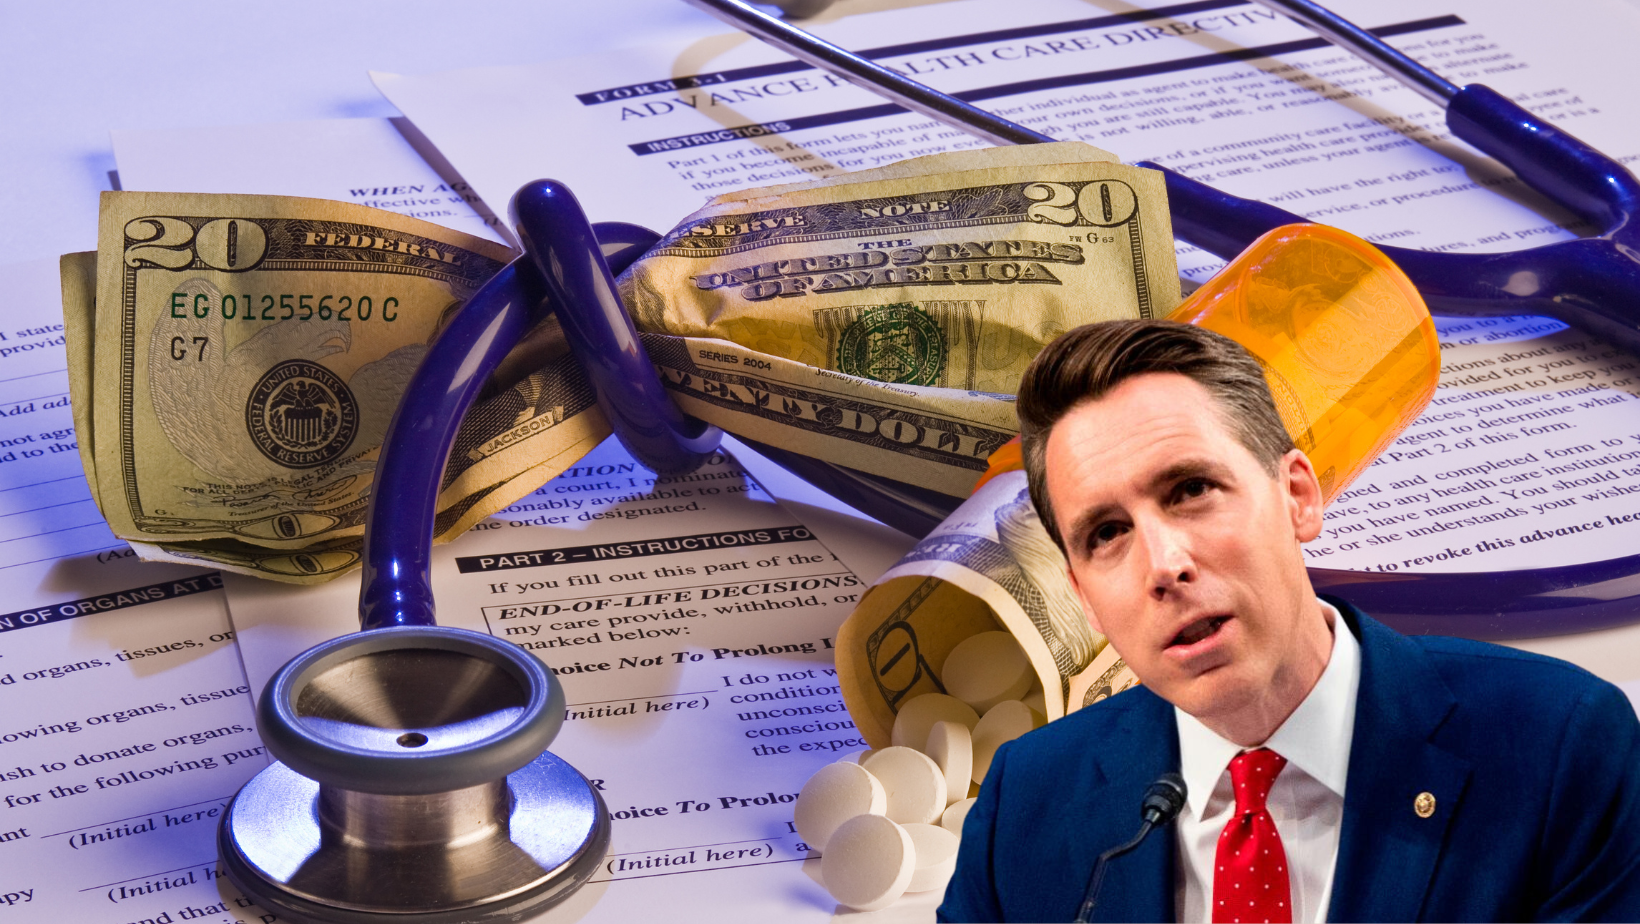 Josh Hawley over a graphic representation of pills and money